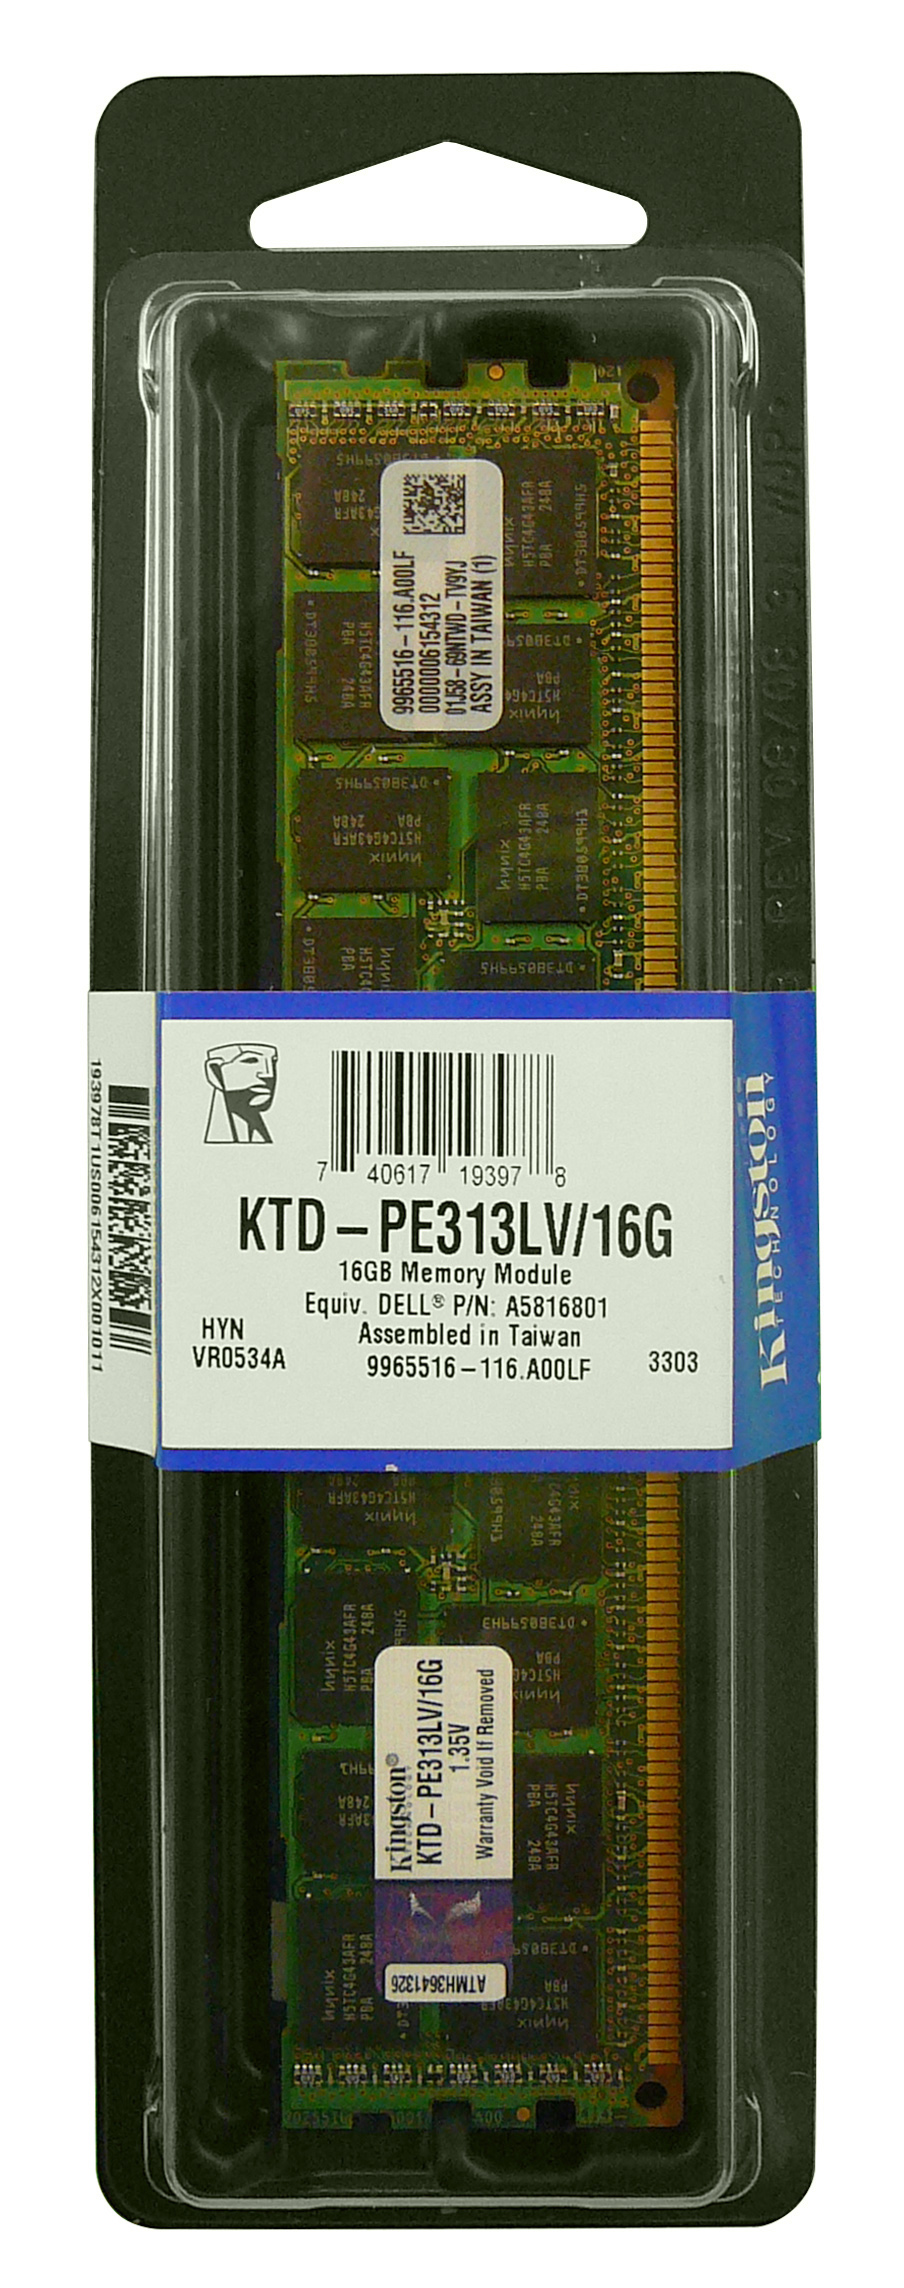 KTD-PE313LV/16G Kingston 16GB PC3-10600 DDR3-1333MHz ECC Registered CL9 240-Pin DIMM 1.35V Low Voltage Memory Module for Dell